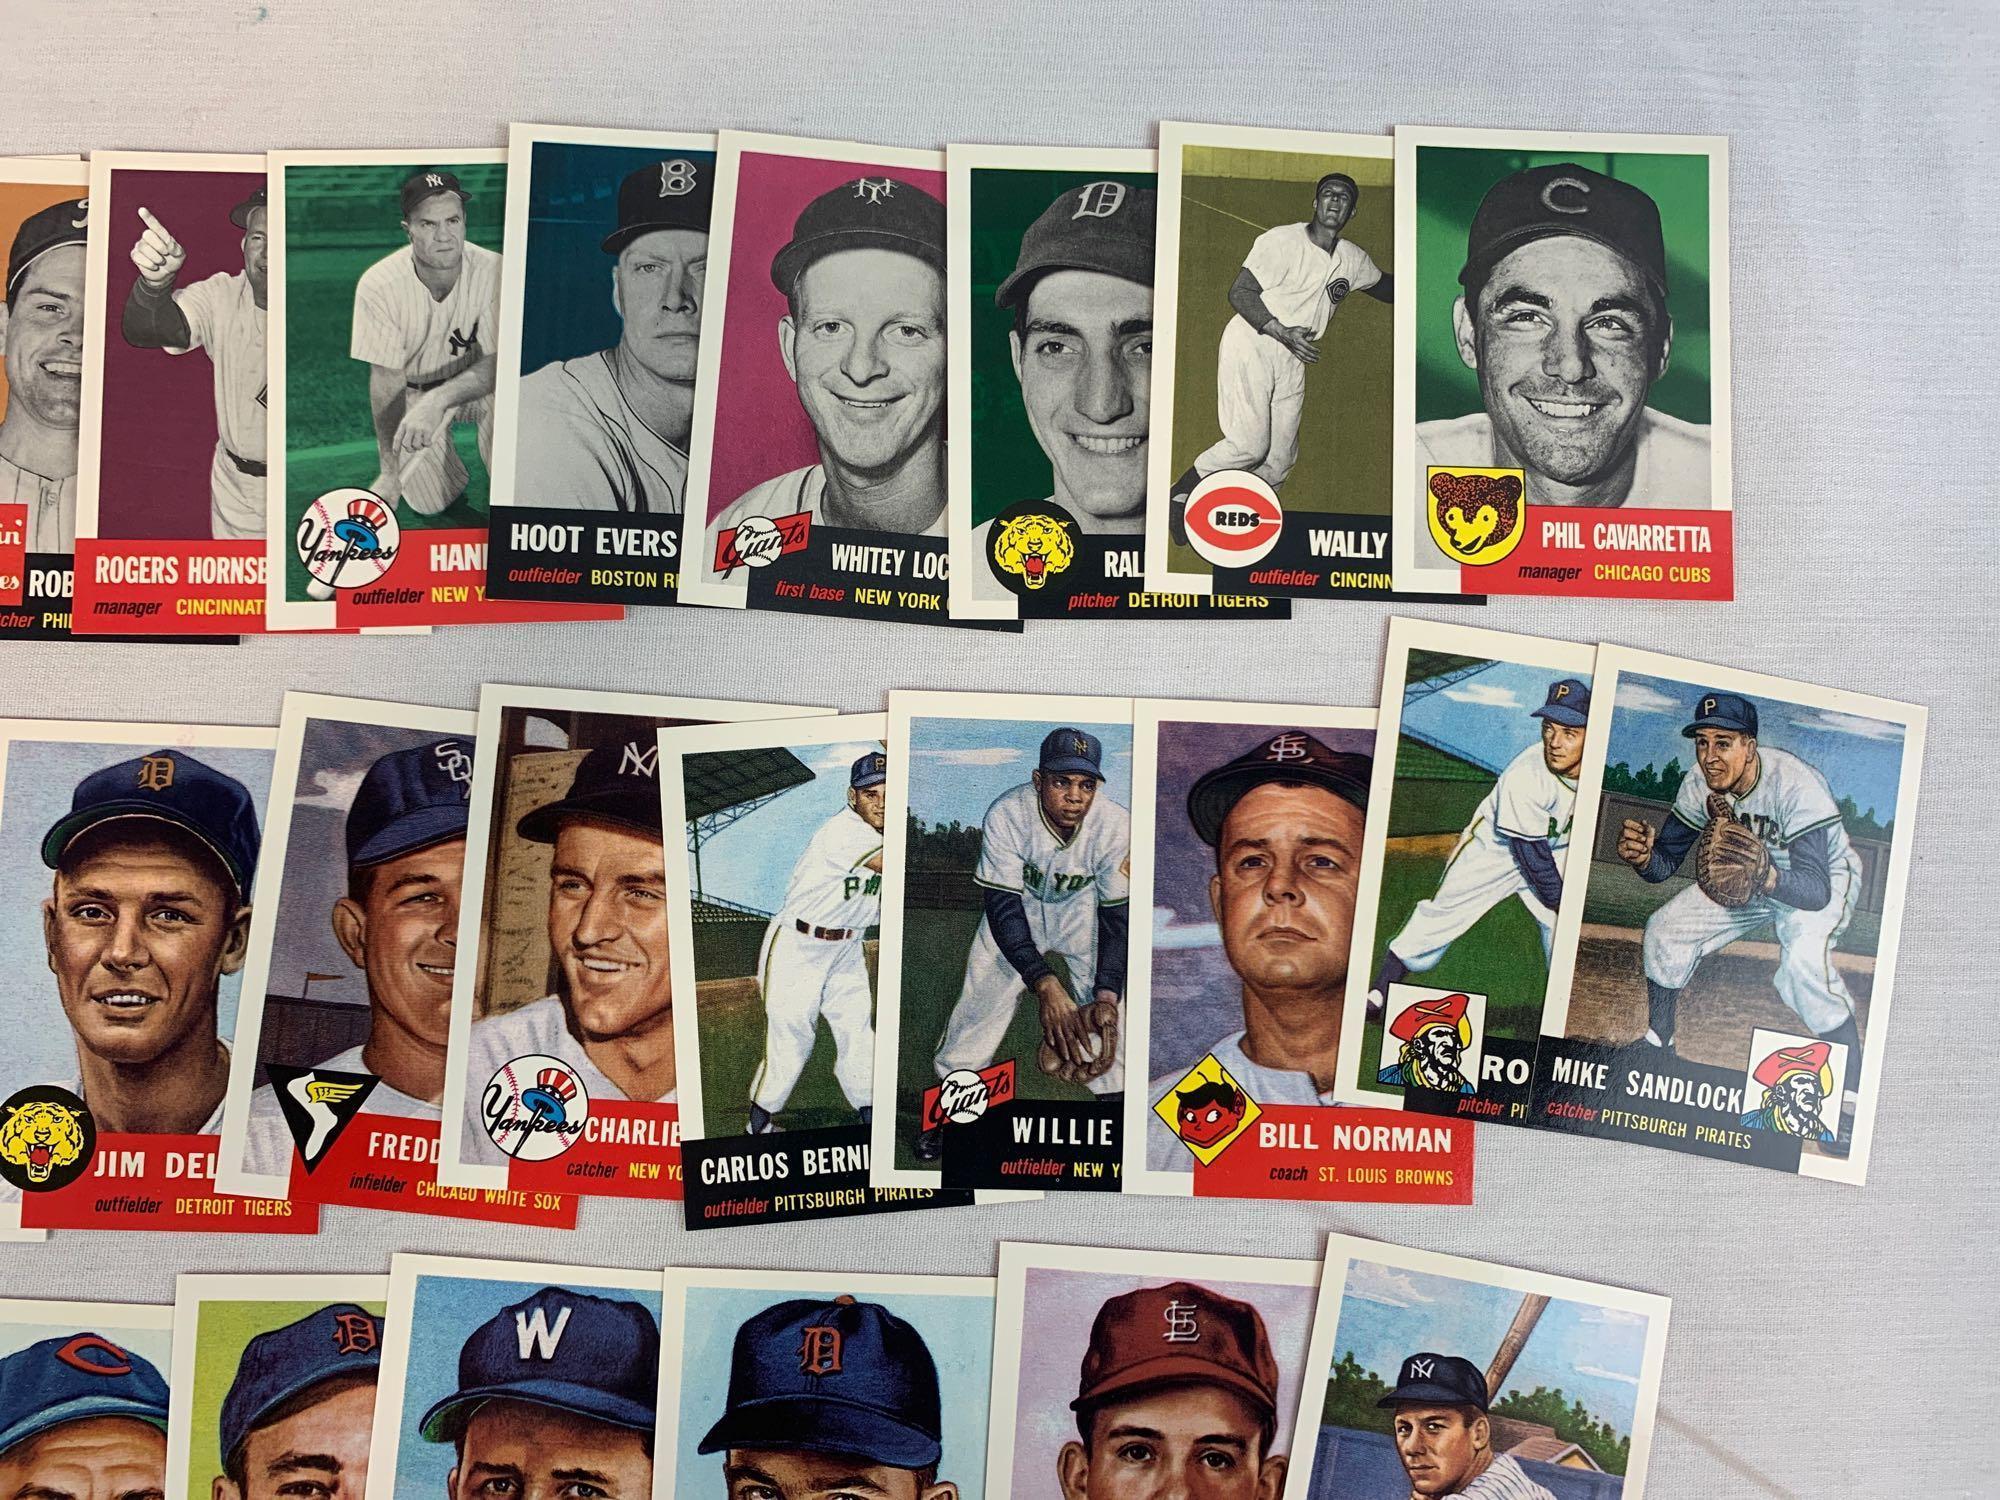 1953 Topps Archive set with Mantle and Robinson